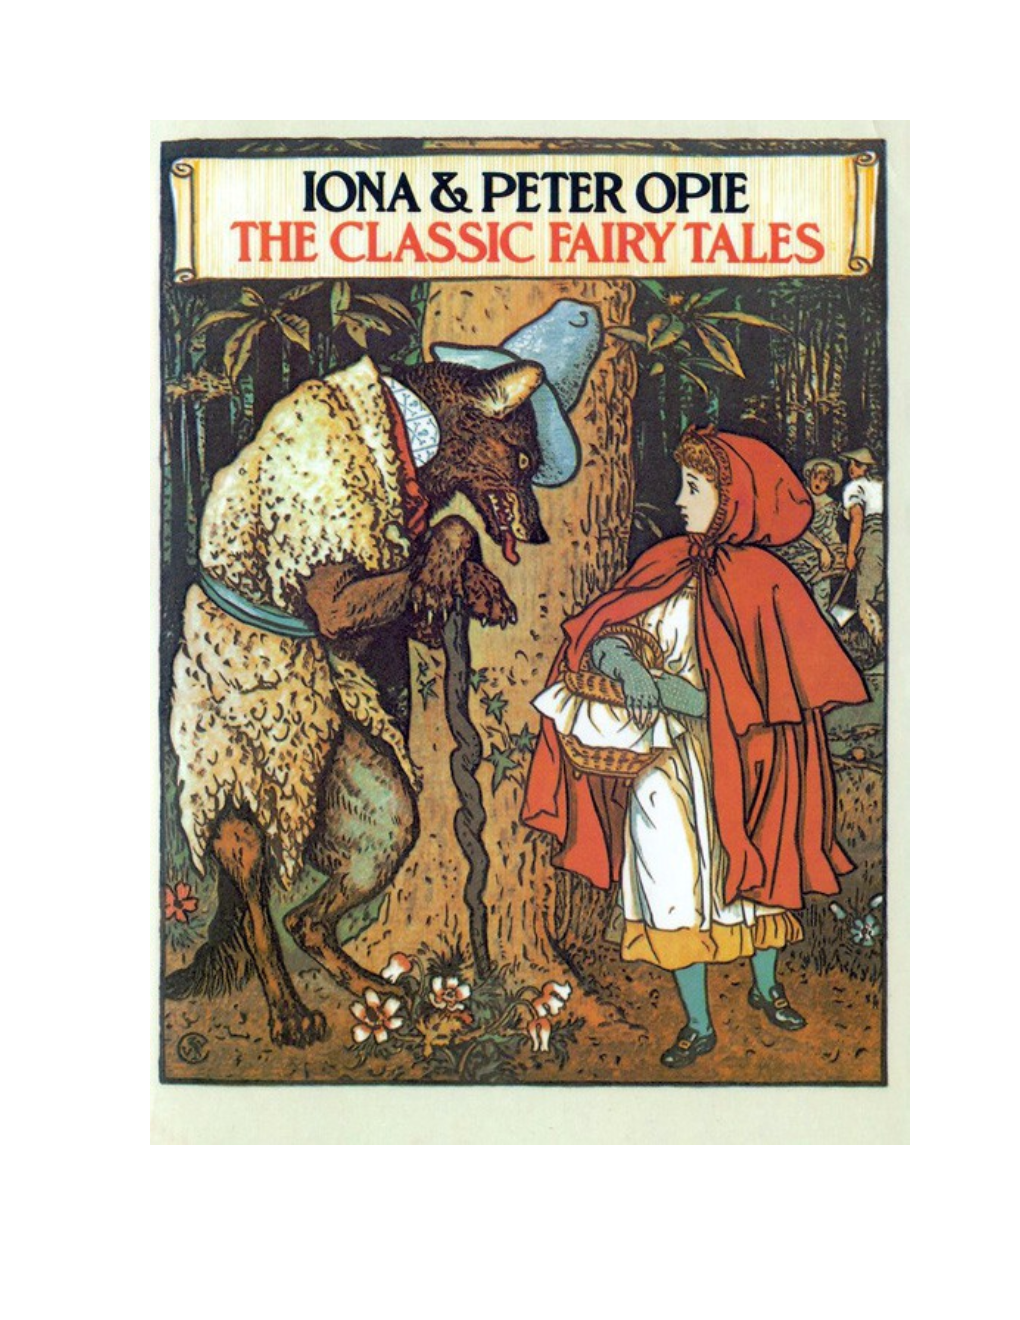 Iona and Peter Opie